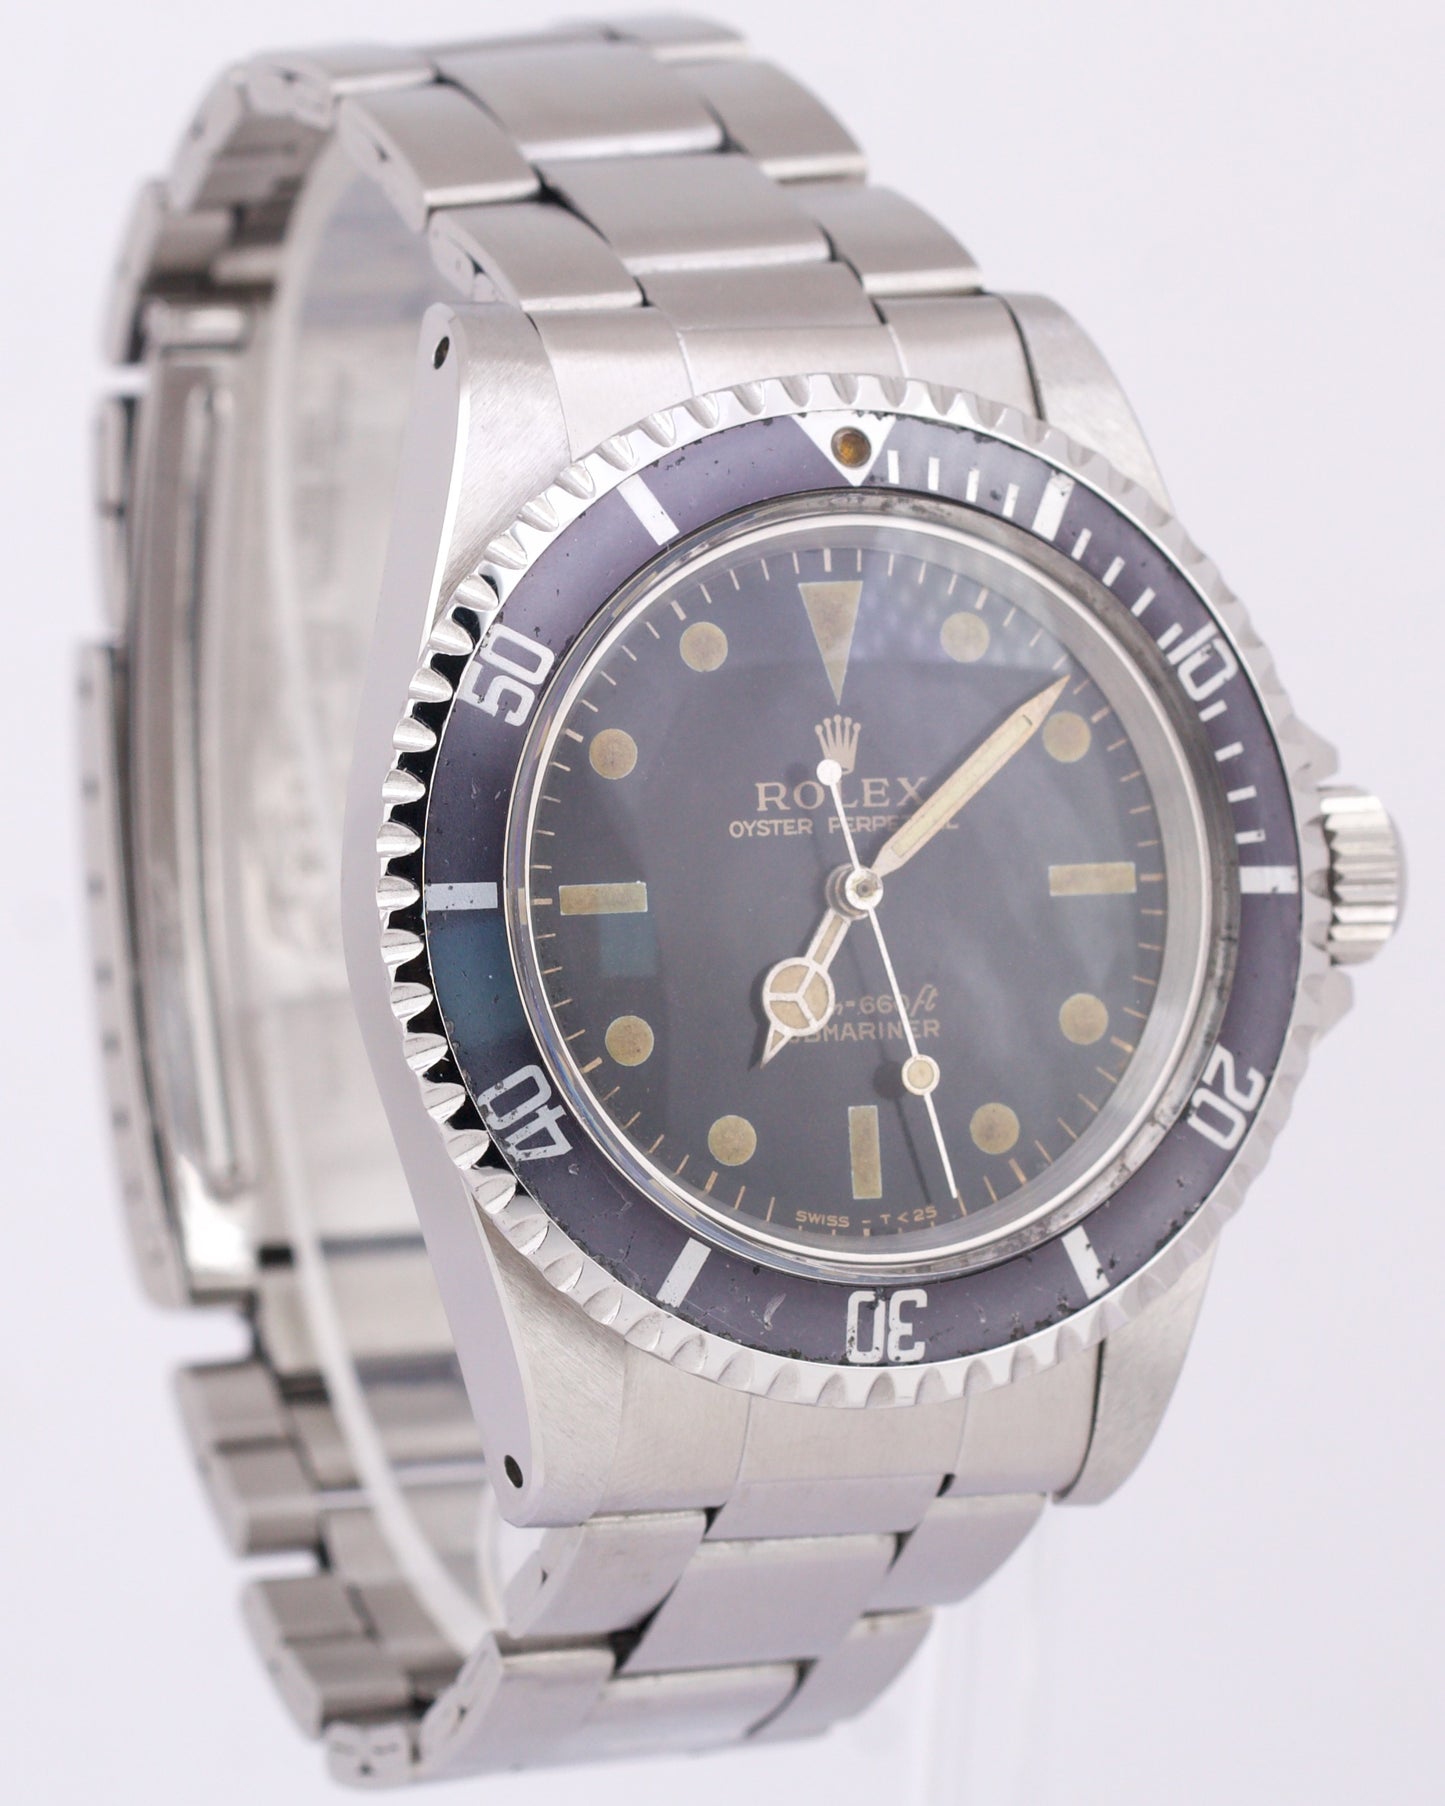 VINTAGE 1966 Rolex Submariner No-Date GILT DIAL 40mm Steel Automatic 5513 Watch